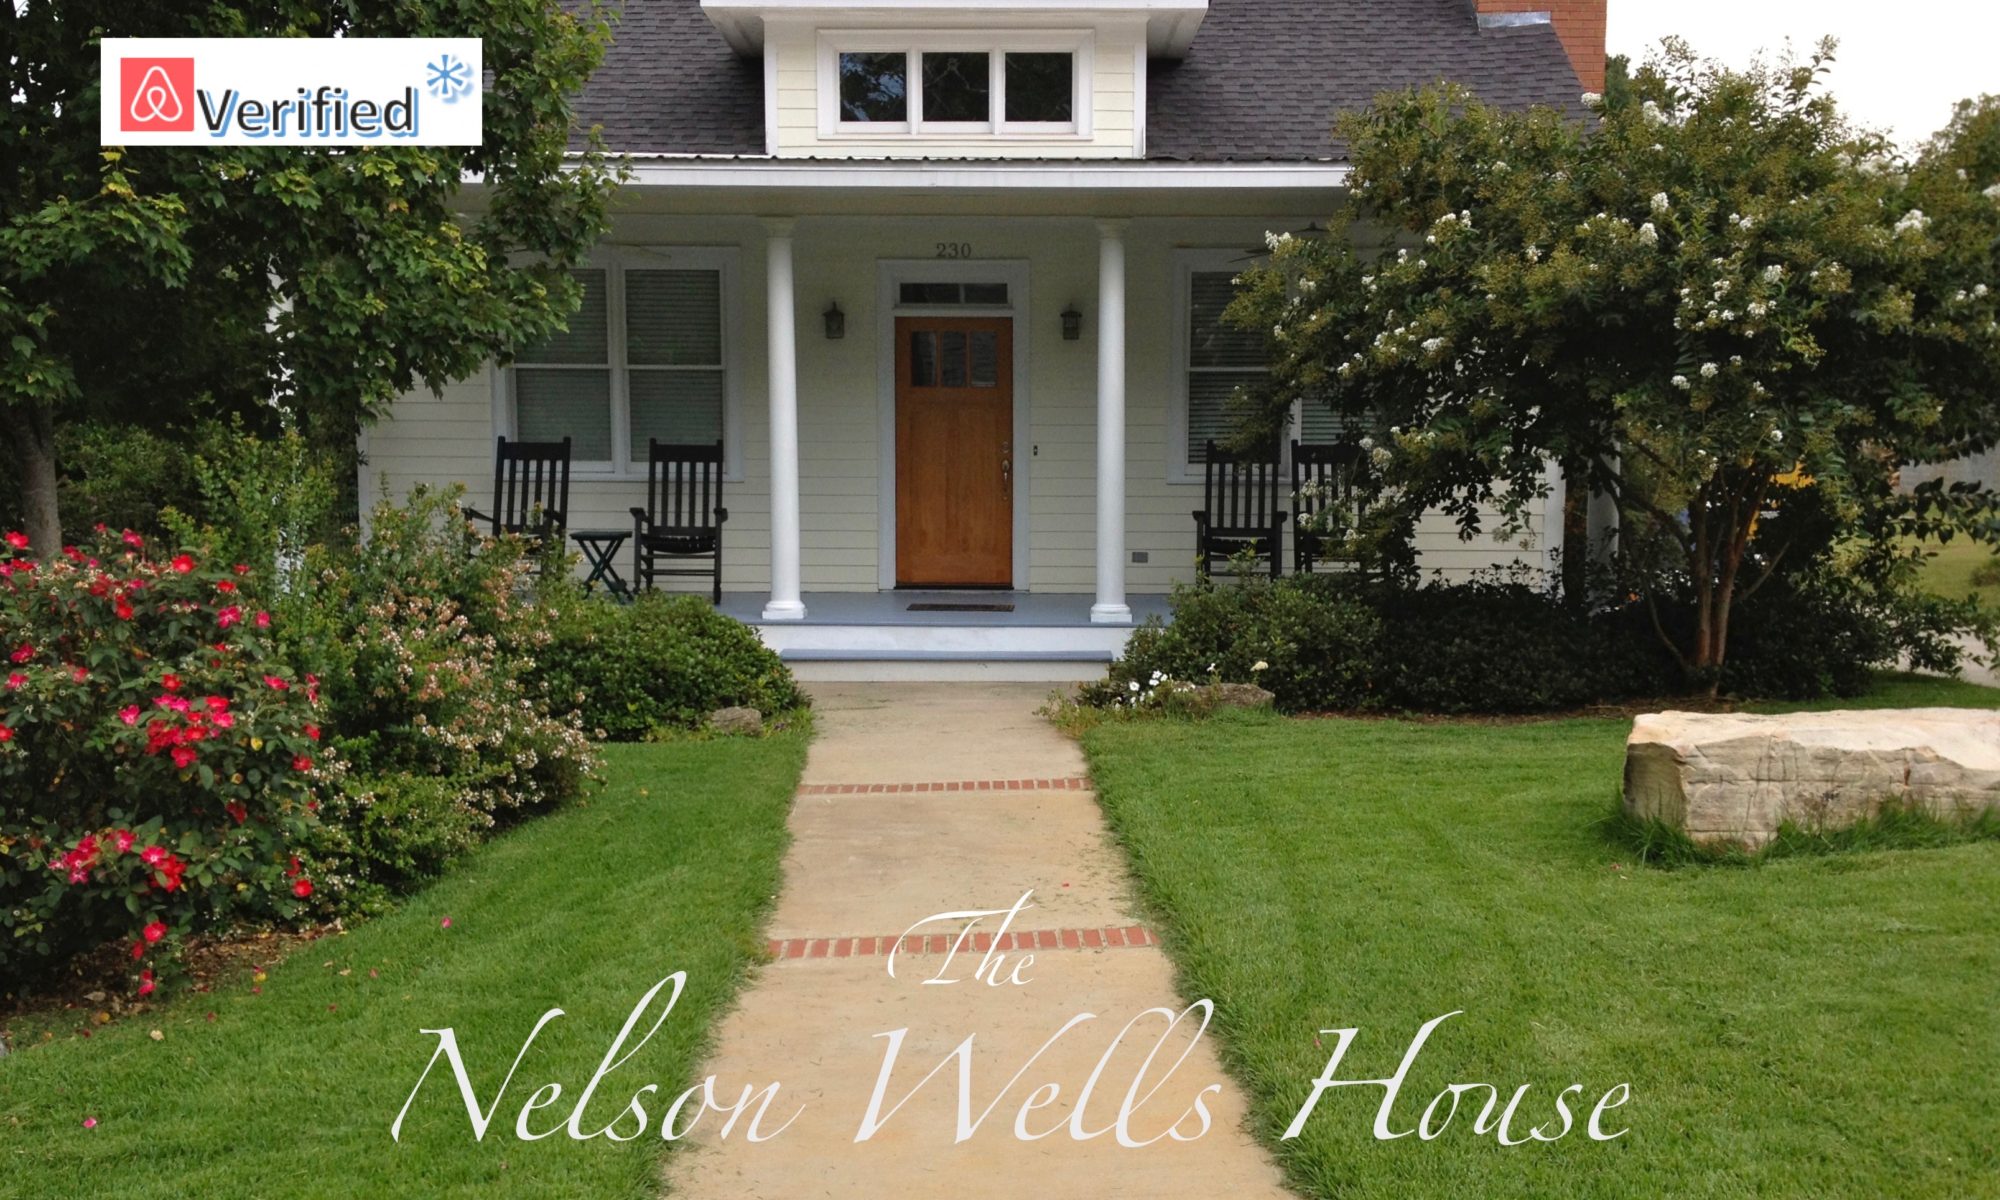 Nelson_Wells AirBnB Nelson wells team clermont athens georgia non-sexist photo